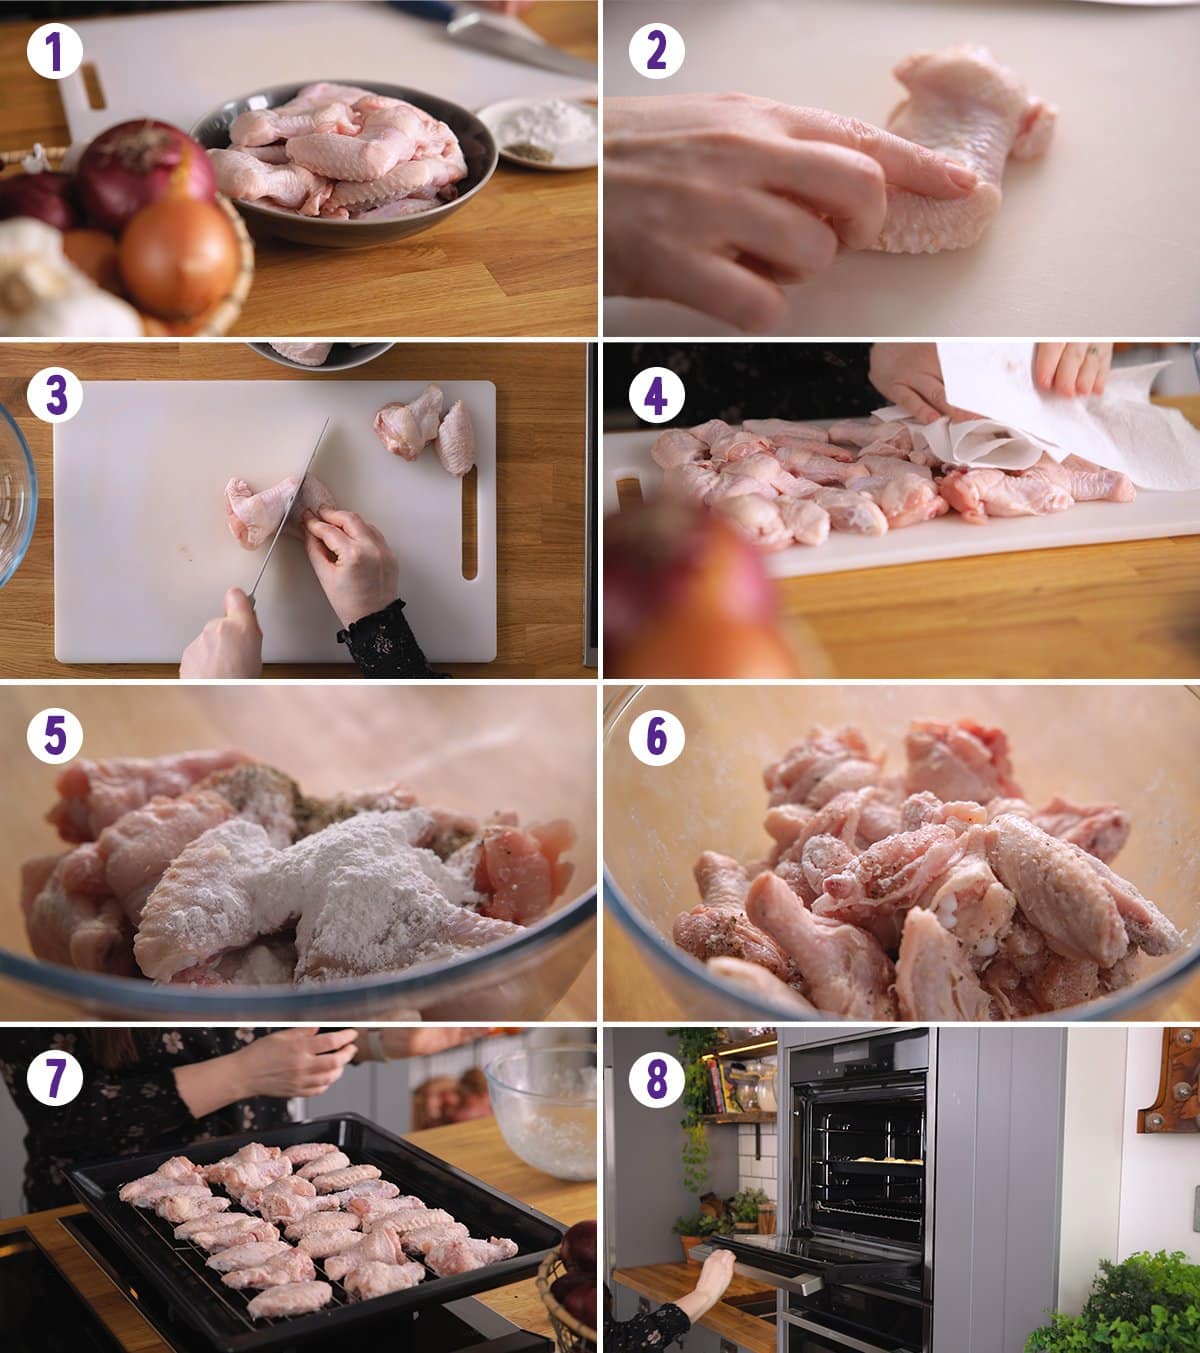 8 image collage showing how to make crispy chicken wings